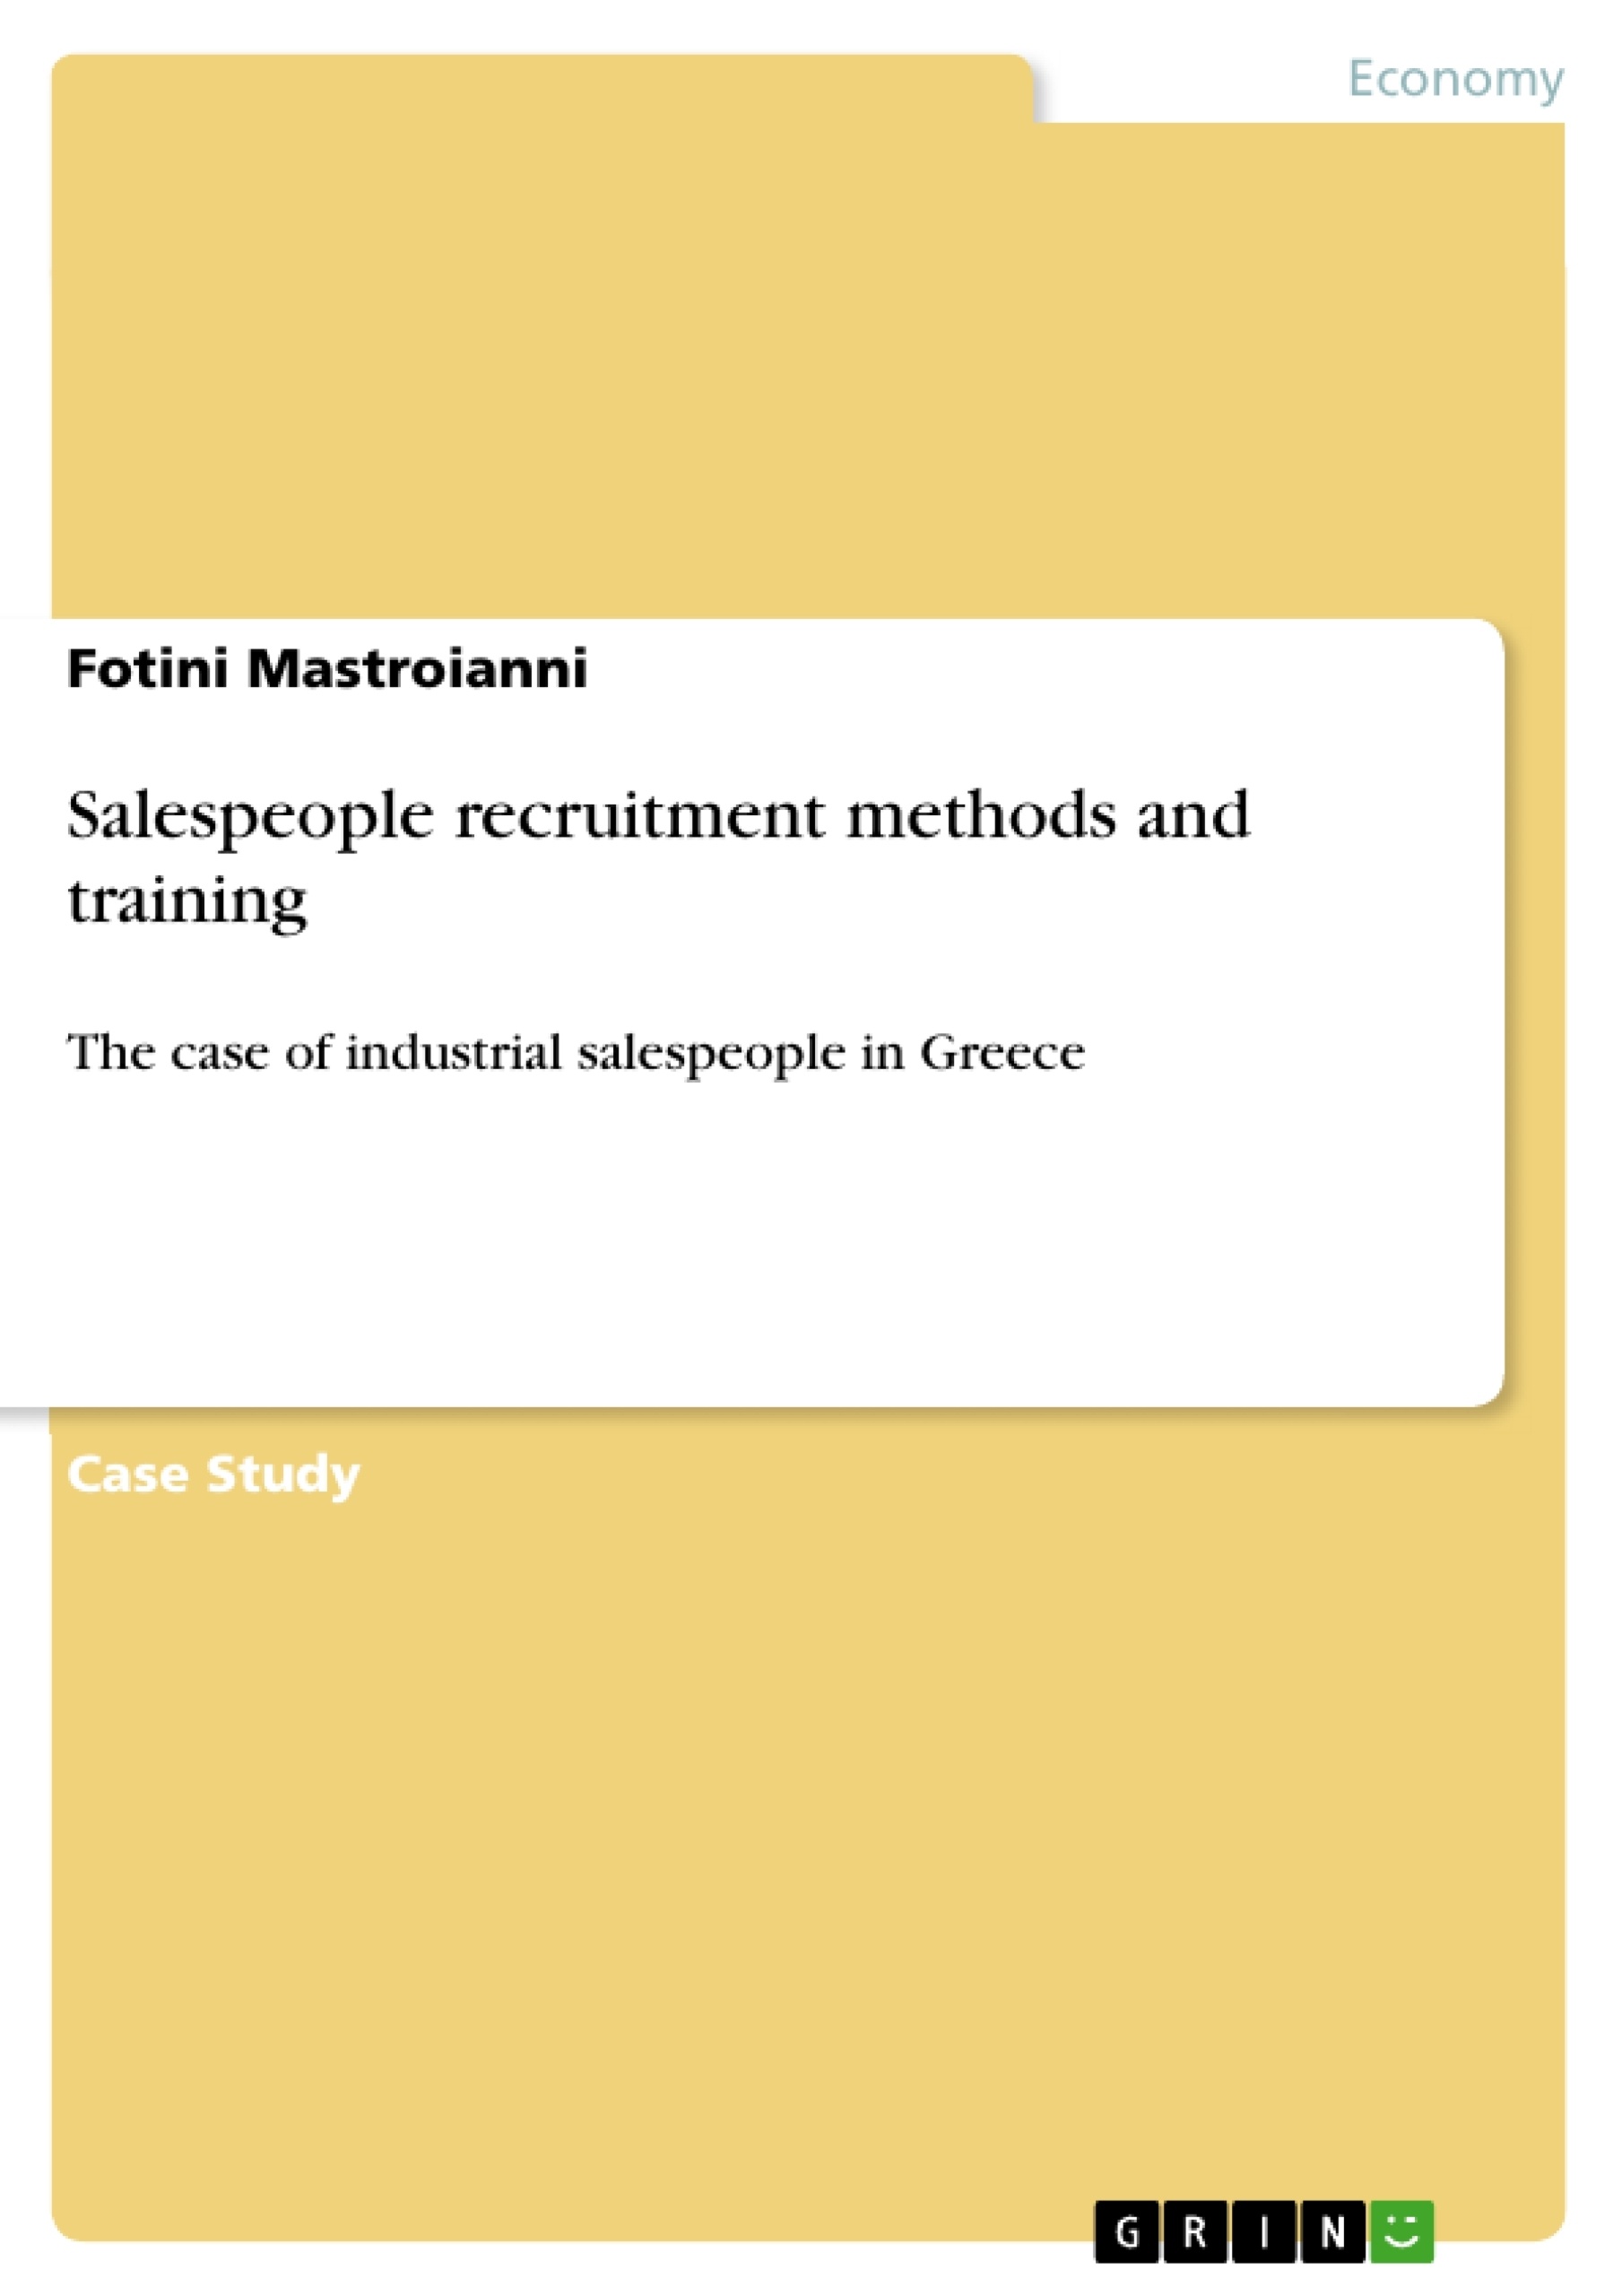 Title: Salespeople recruitment methods and training